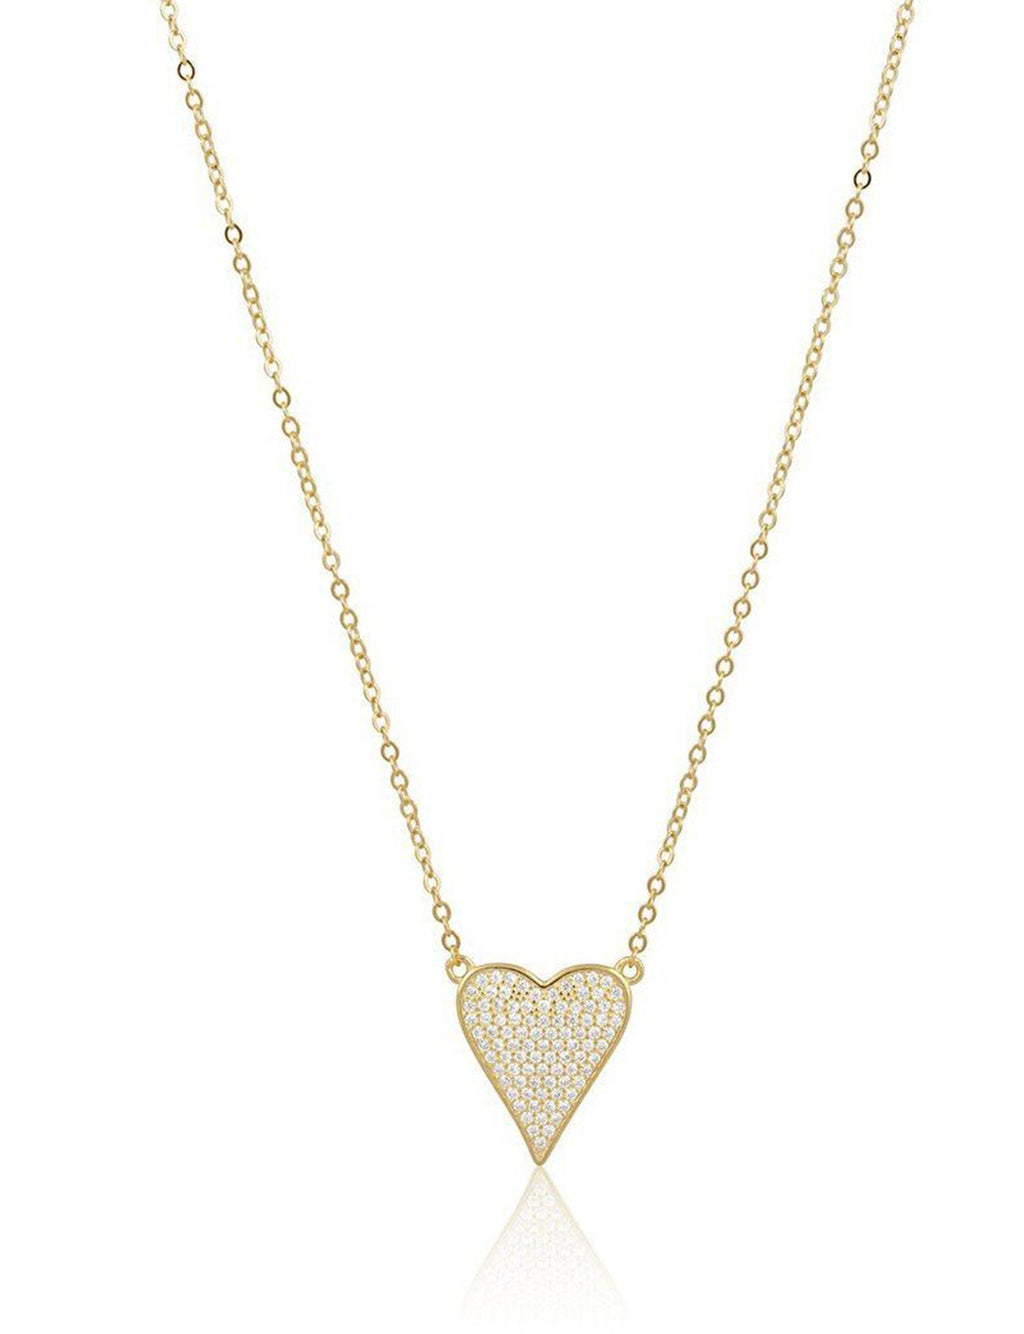 Audrey Heart Necklace in Gold